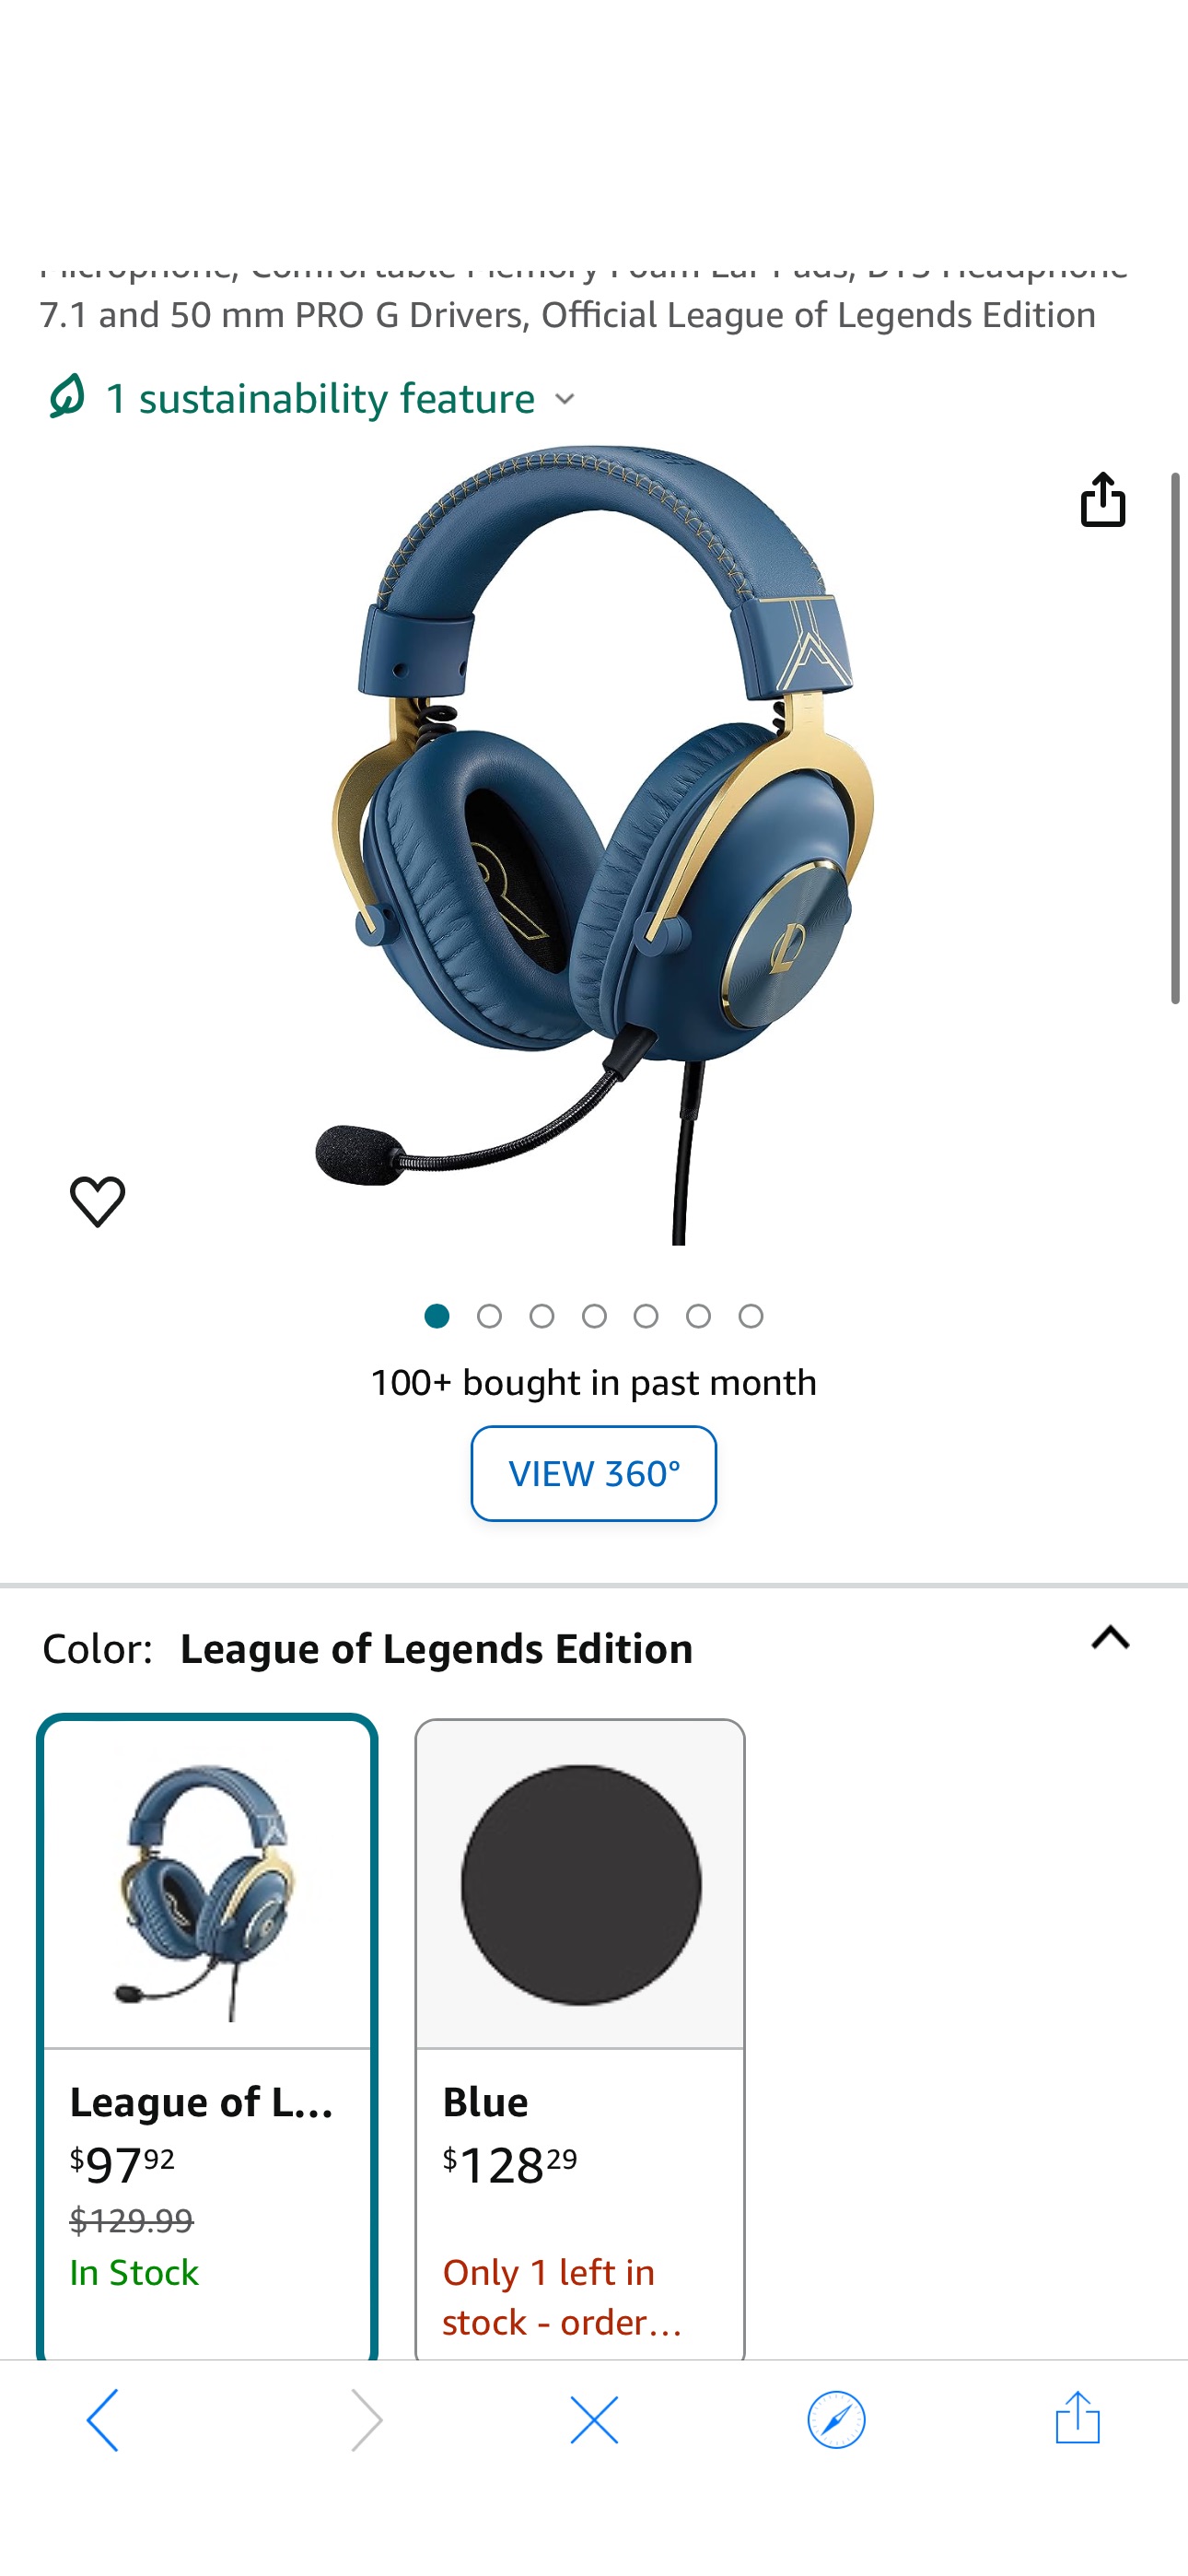 Amazon.com: Logitech G PRO X Gaming Headset - Blue VO!CE, Detachable Microphone, Comfortable Memory Foam Ear Pads, DTS Headphone 7.1 and 50 mm PRO G Drivers, Official League of Legends Edition : Every